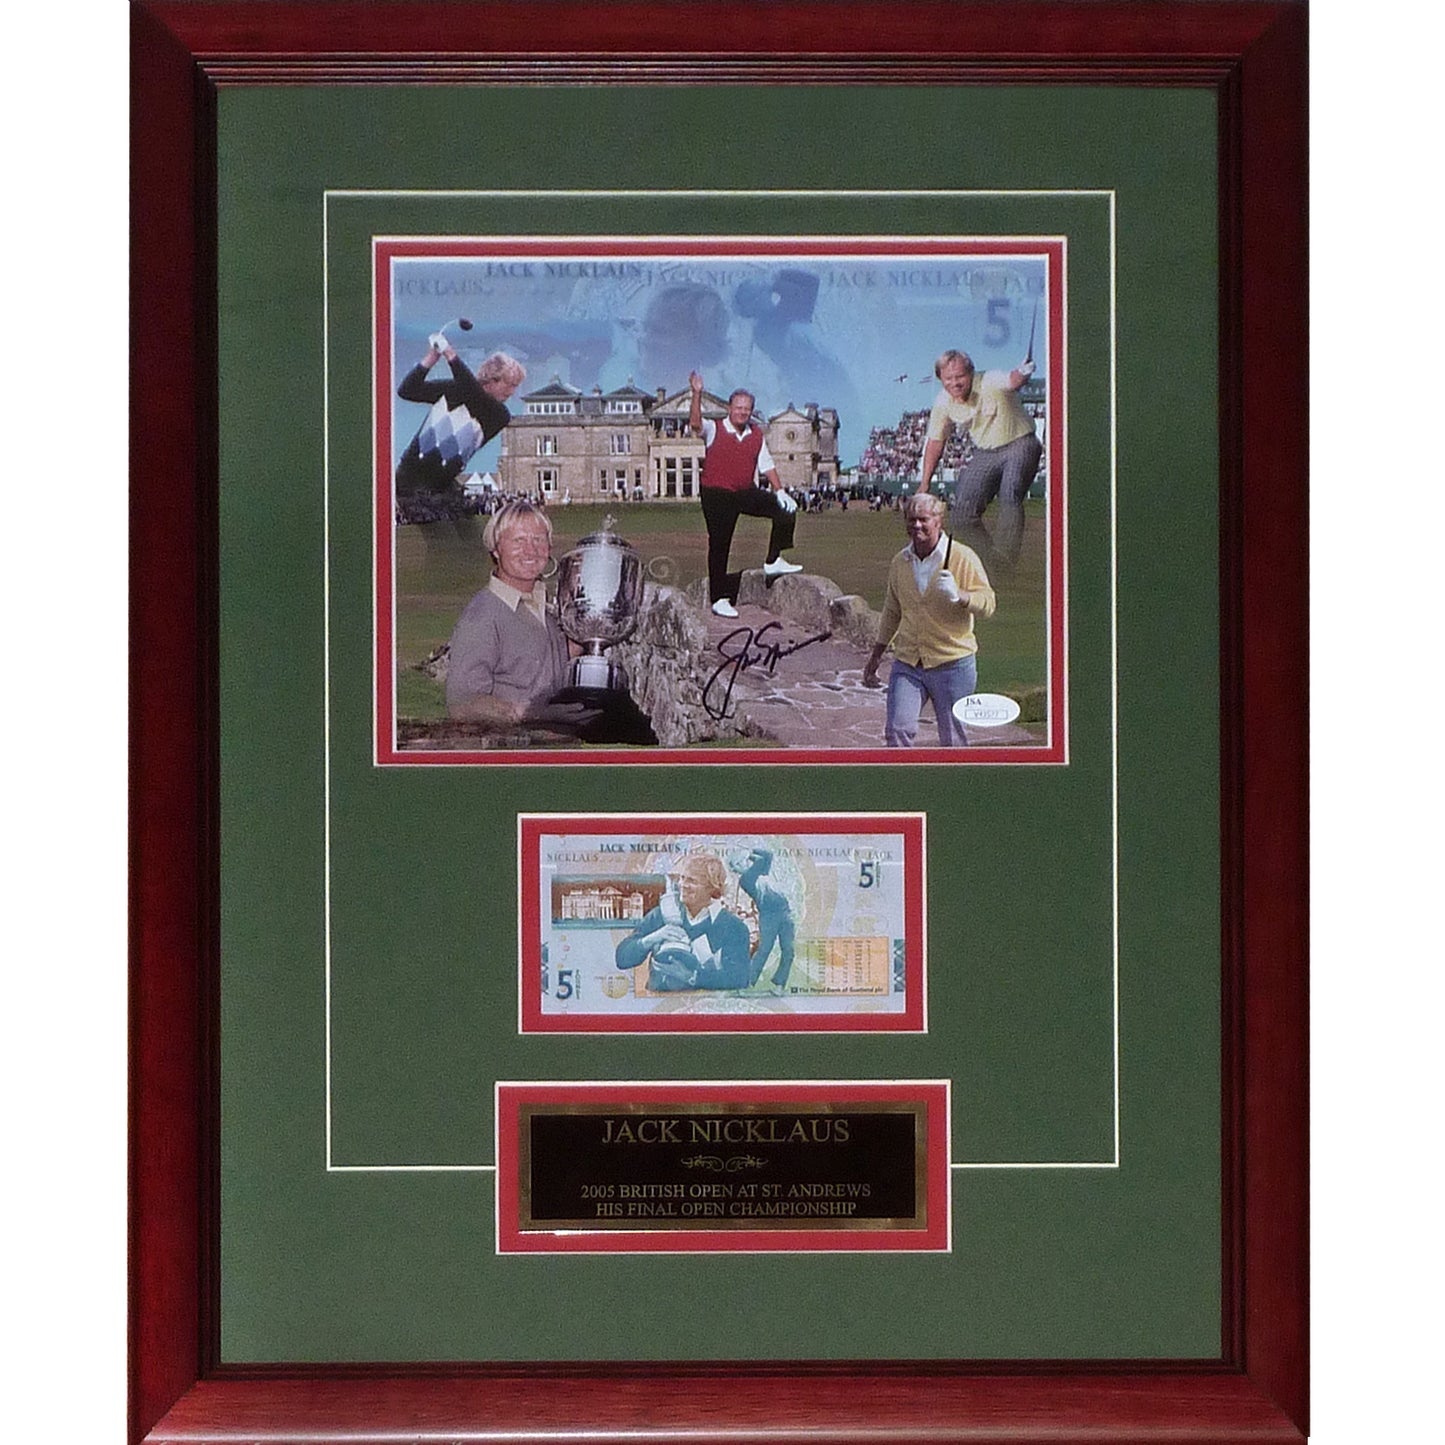 Jack Nicklaus Autographed RBS 5 Pound Note (2005 British Open) Deluxe Framed Currency Piece